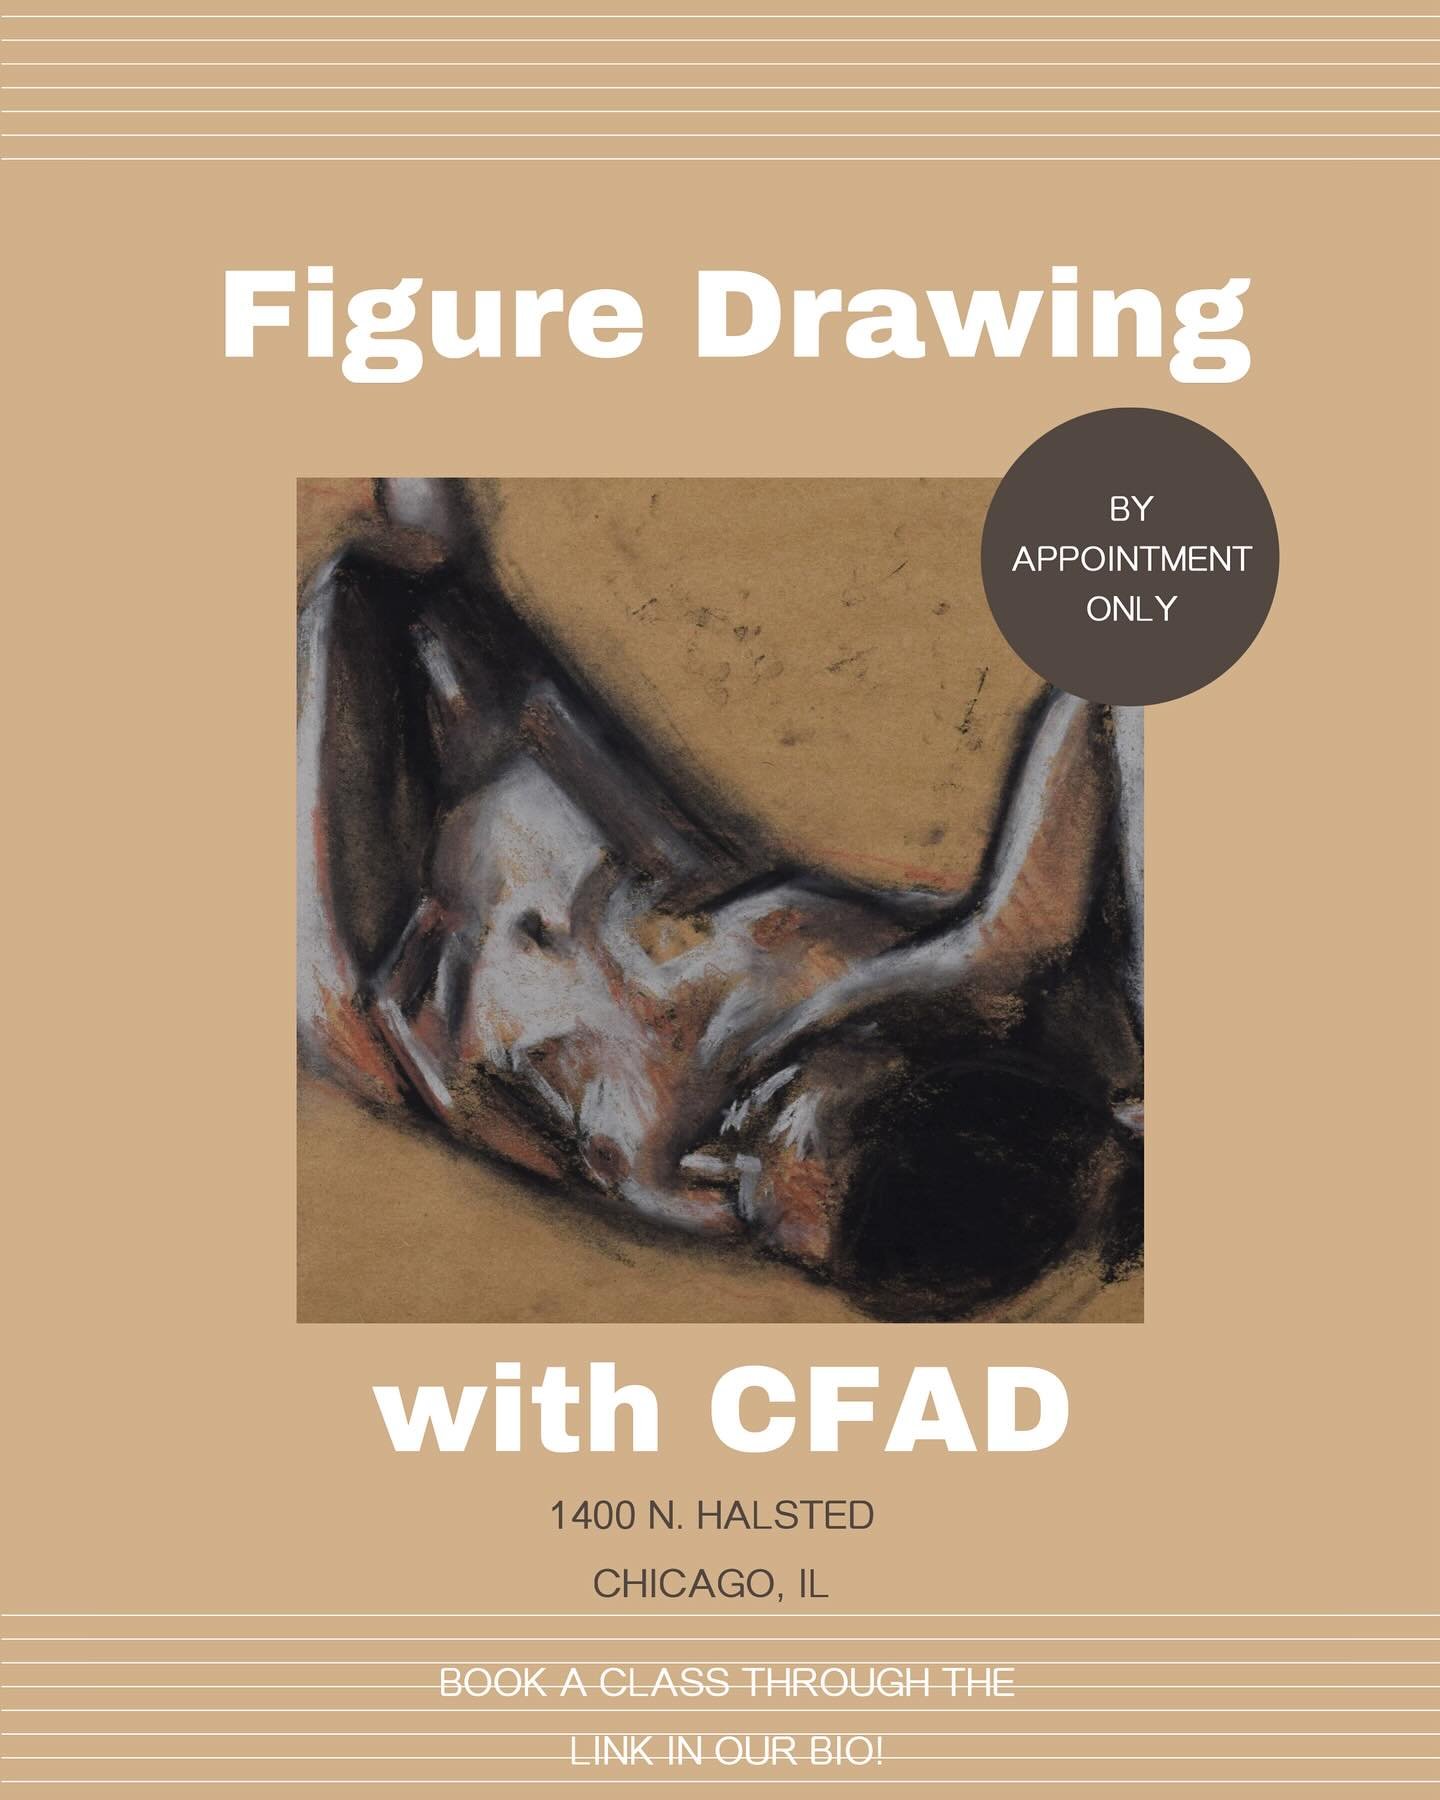 Come join us for a figure drawing session! ✍️

We have Drop-In Hours: 
Tuesdays: 11 AM to 1 PM
Saturdays: 11 AM to 1 PM

And Instructed Figure-Drawing Classes: 
Thursdays: 7 to 9 PM

Book a class online to reserve your spot today! You can visit the l